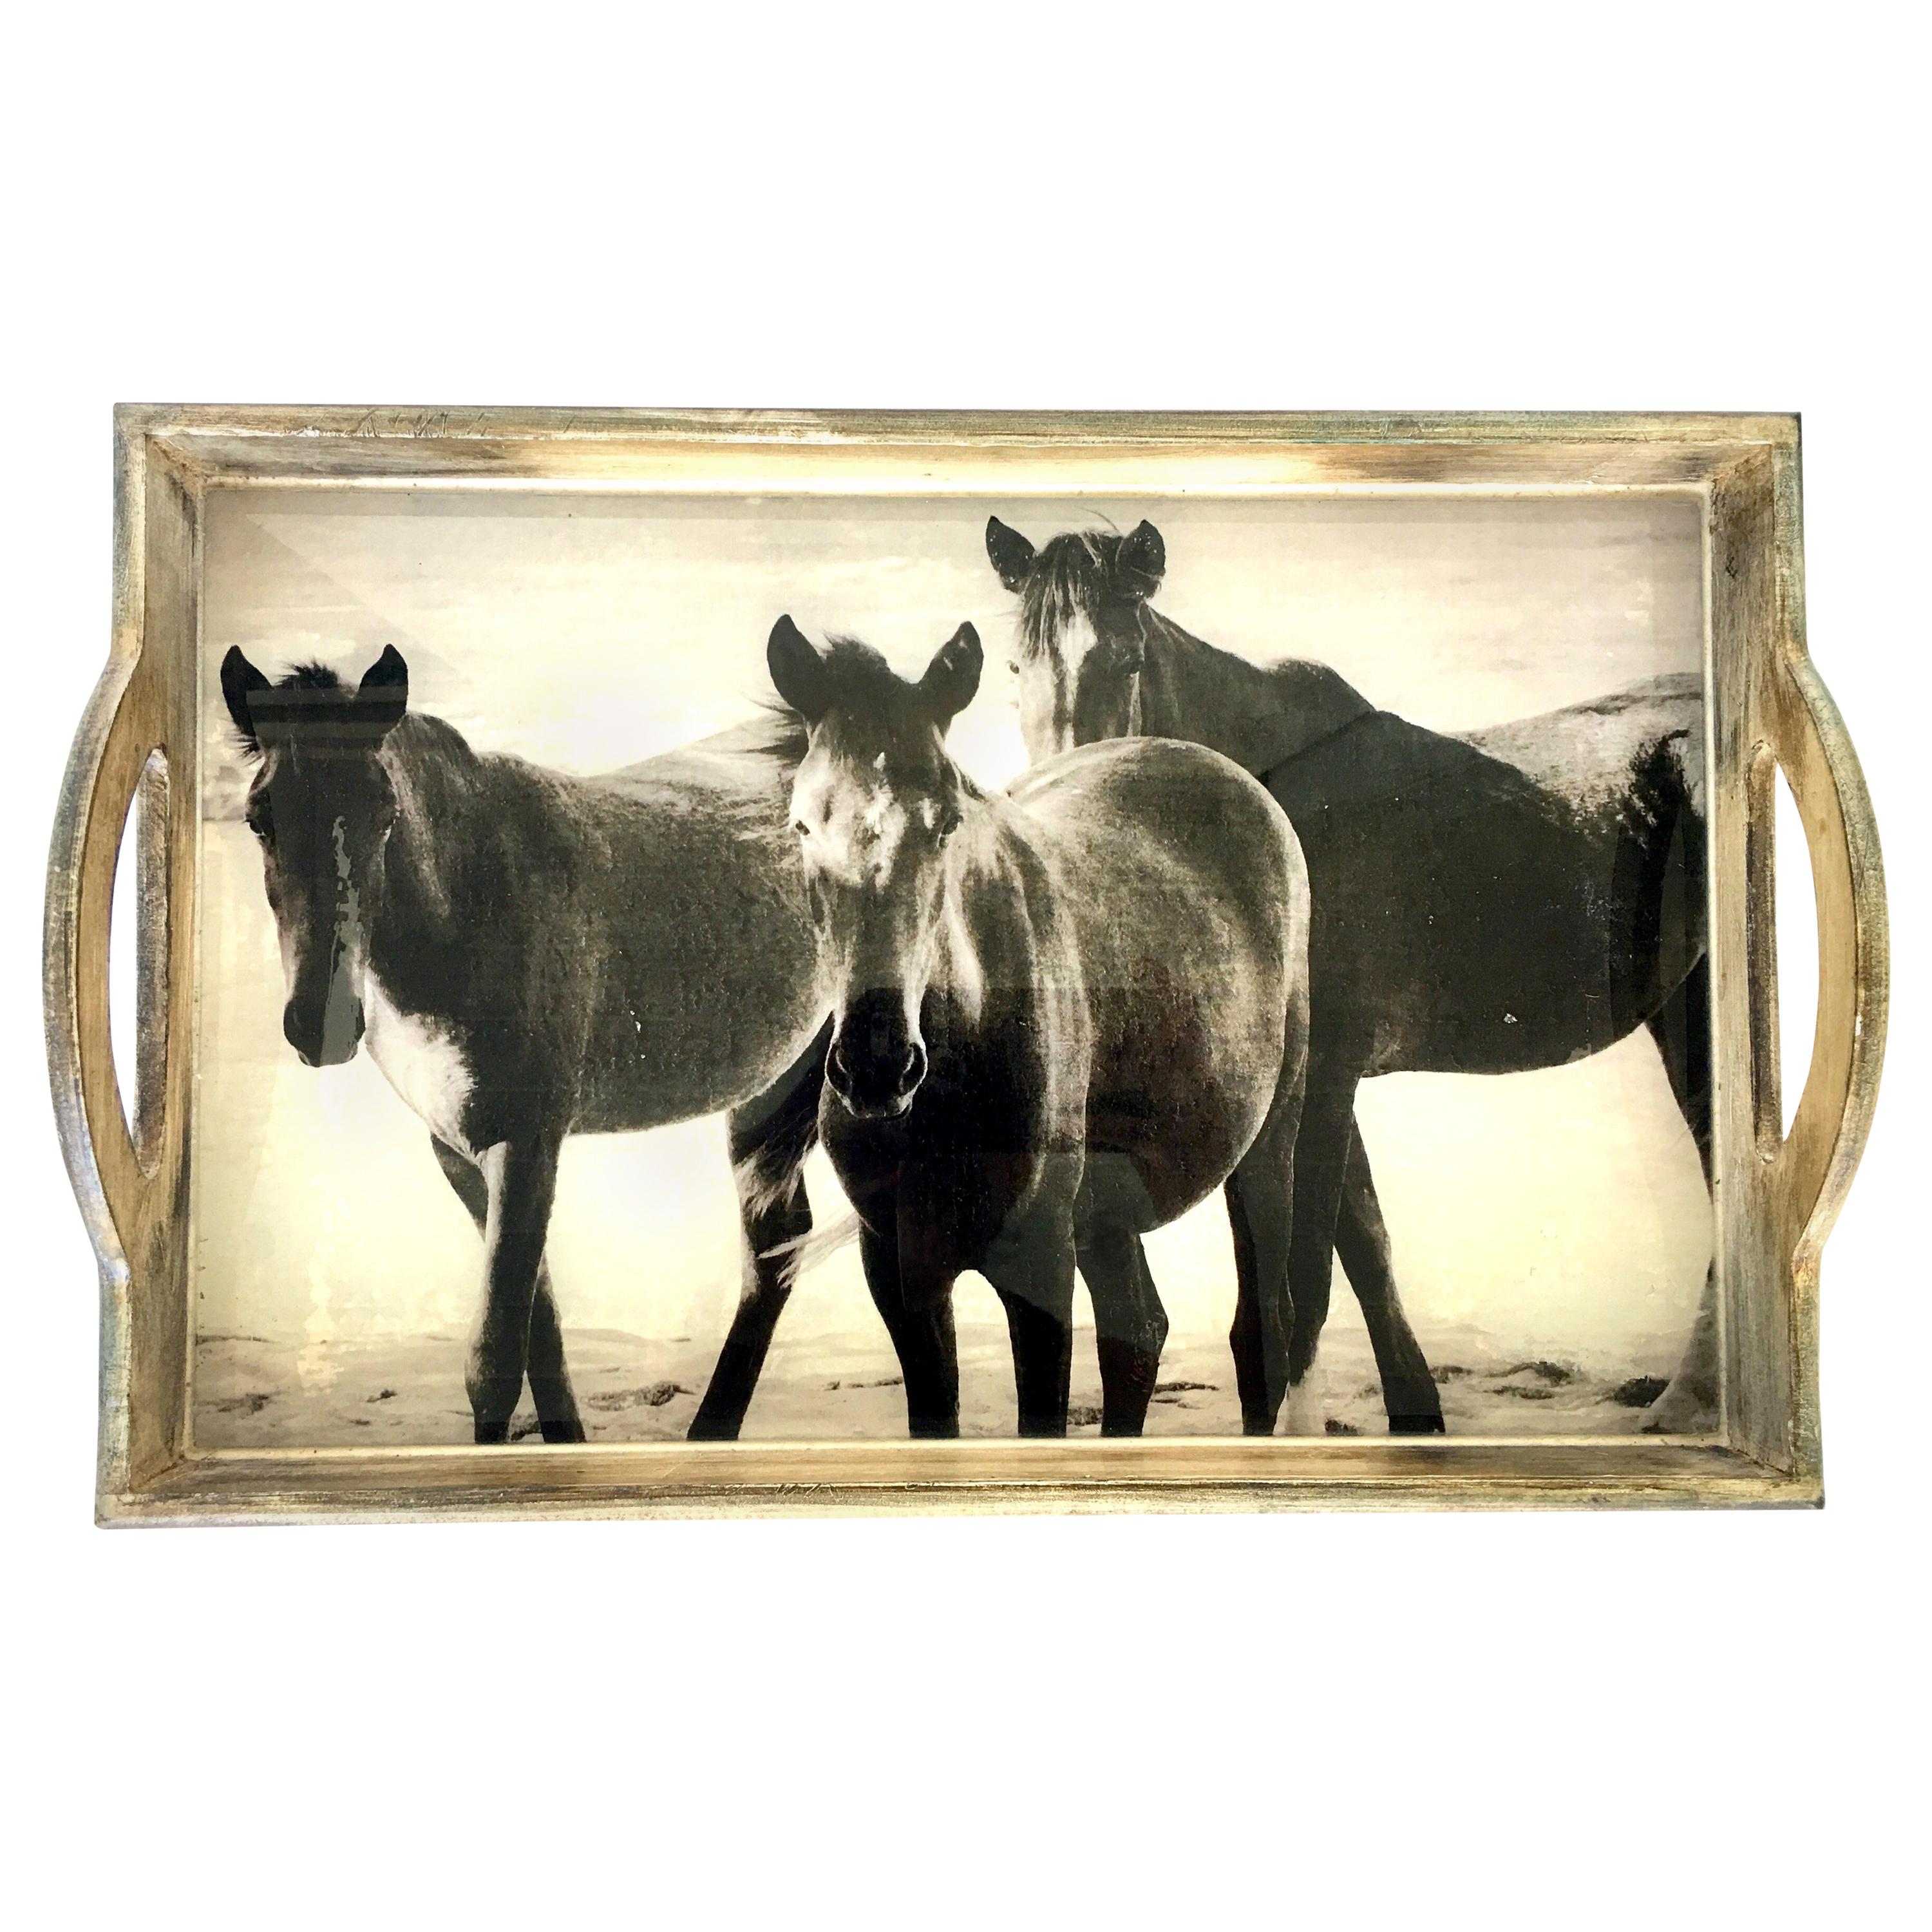 21st Century Wood & Glass Handle "Horse" Tray For Sale